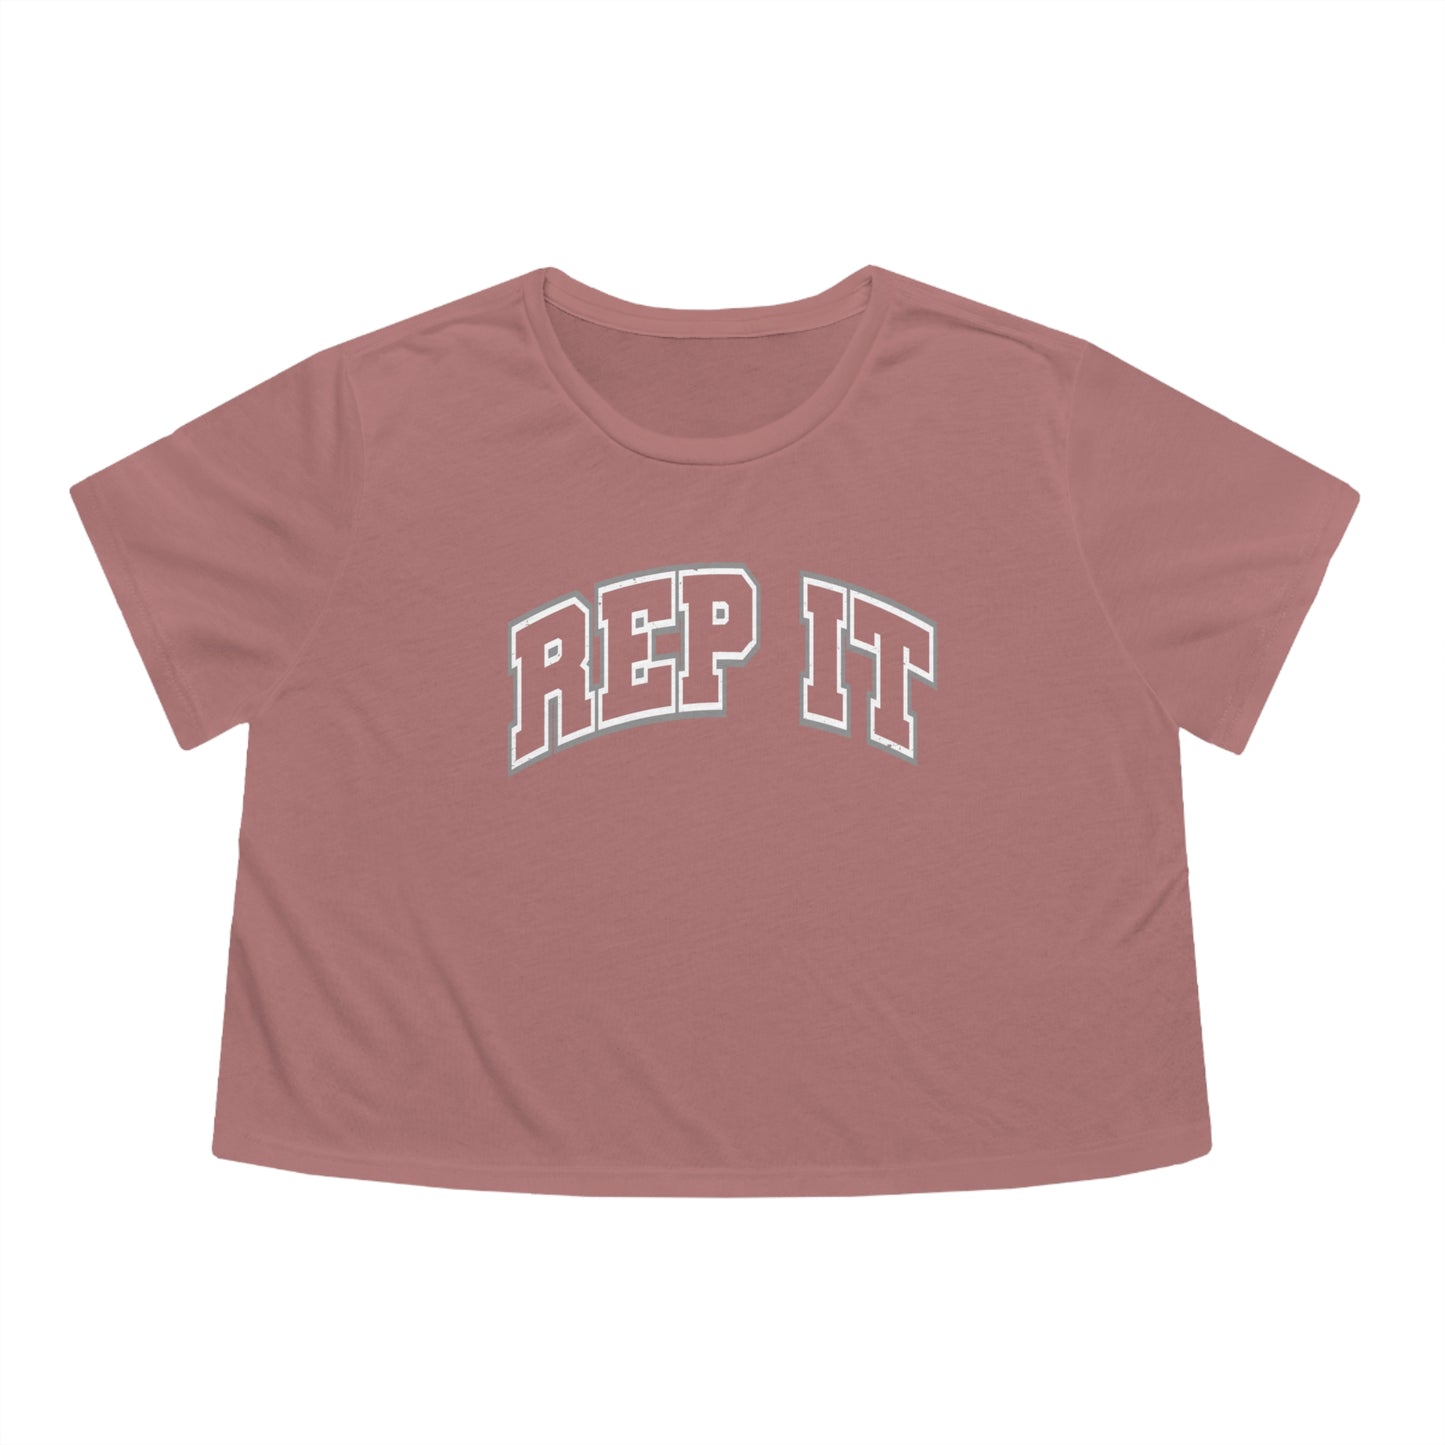 REP IT Arch Crop Tee